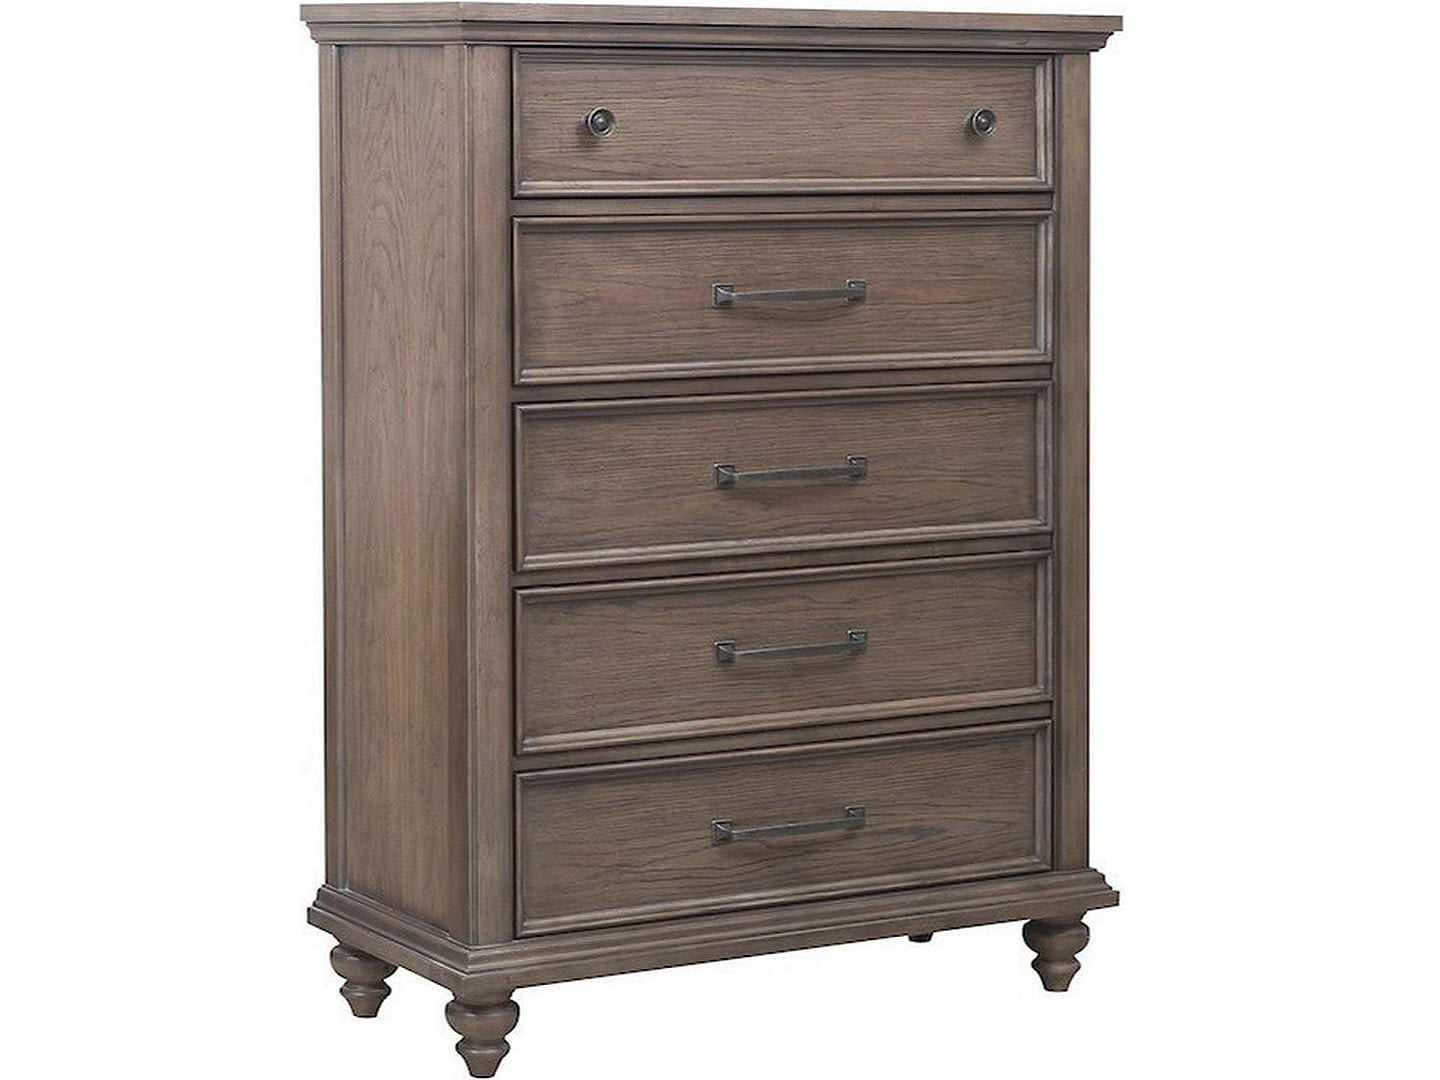 LEO Chest of Drawers - Side